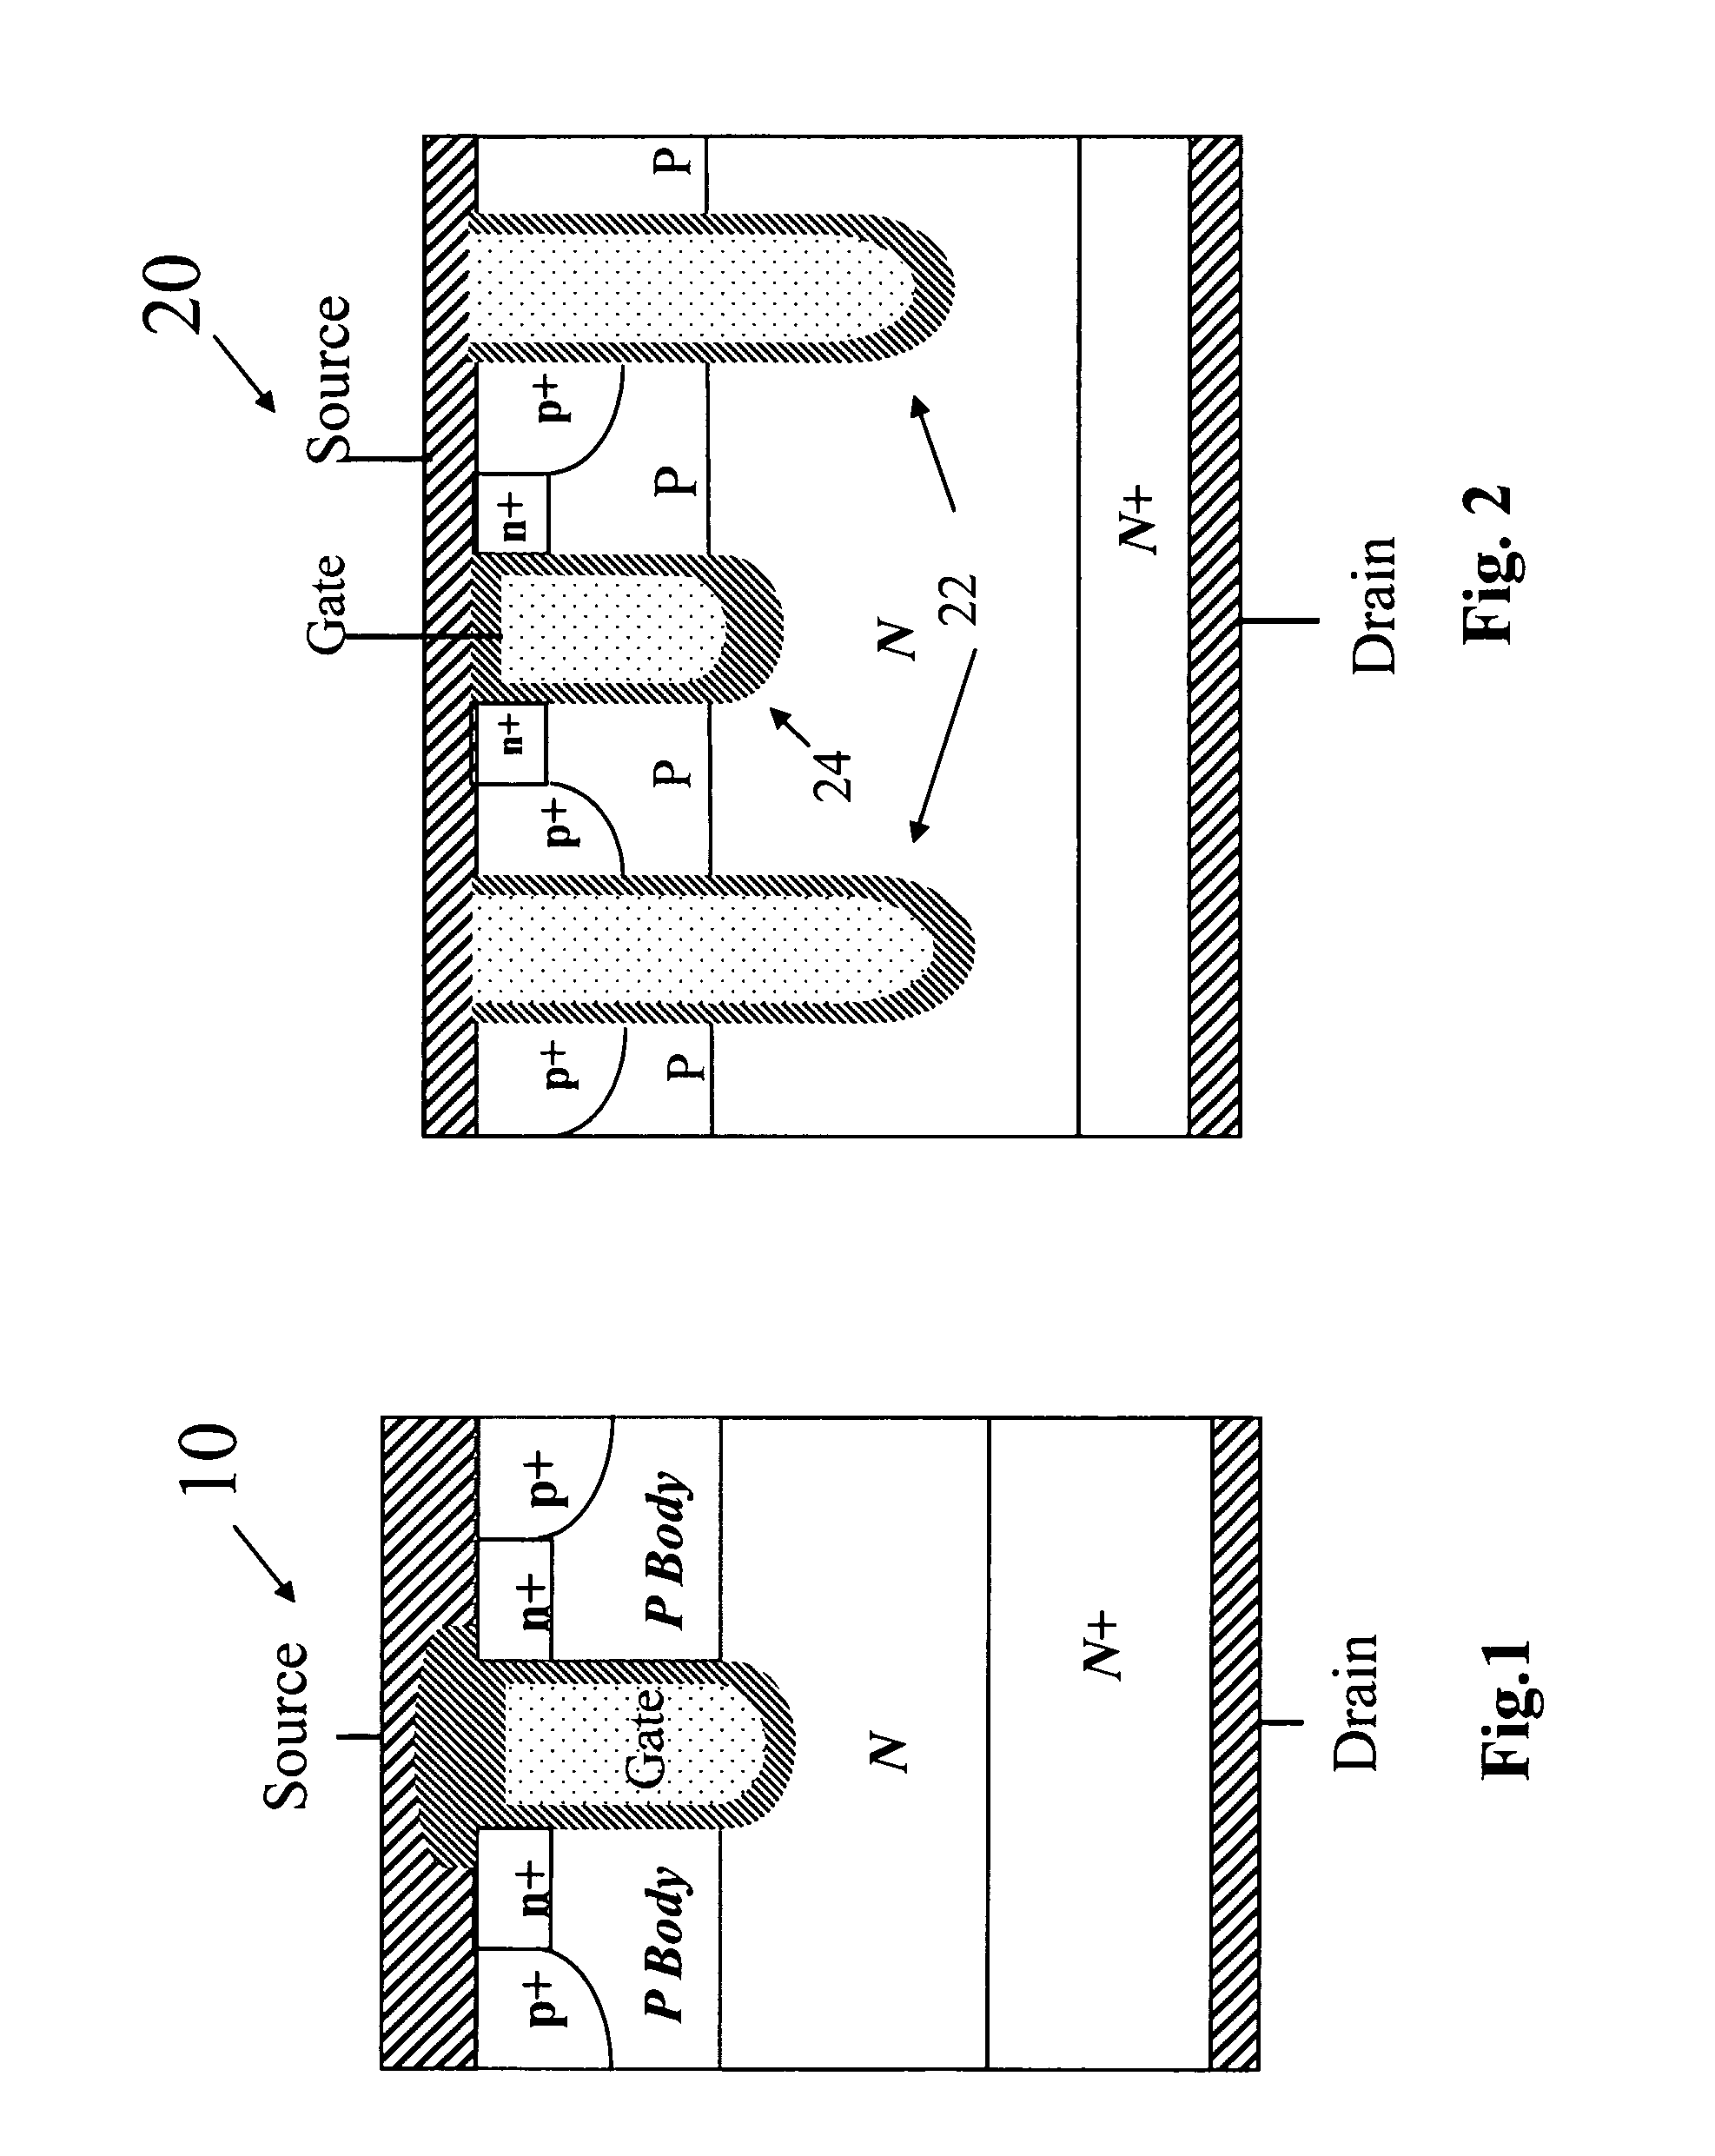 Power MOSFET with recessed field plate